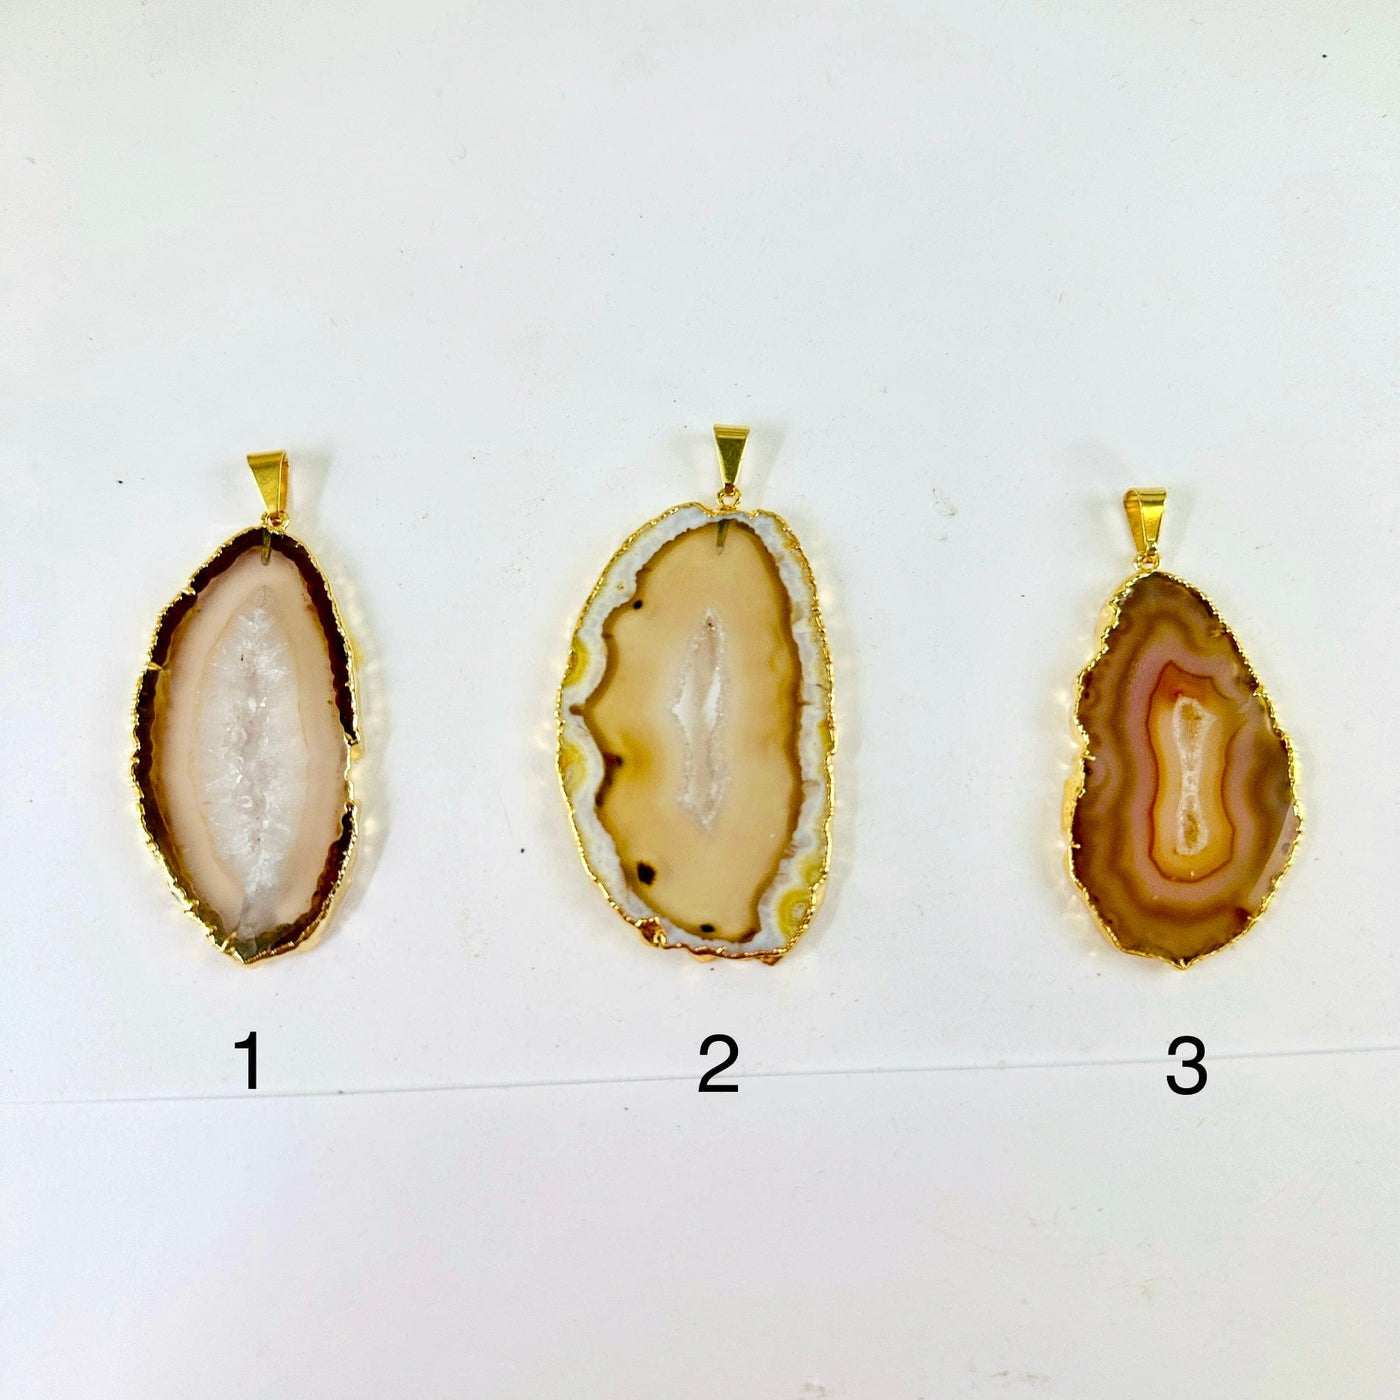 Agate Slice - Gold Electroplated Pendant with Gold Bail - You Choose pendants 1 2 3 labeled